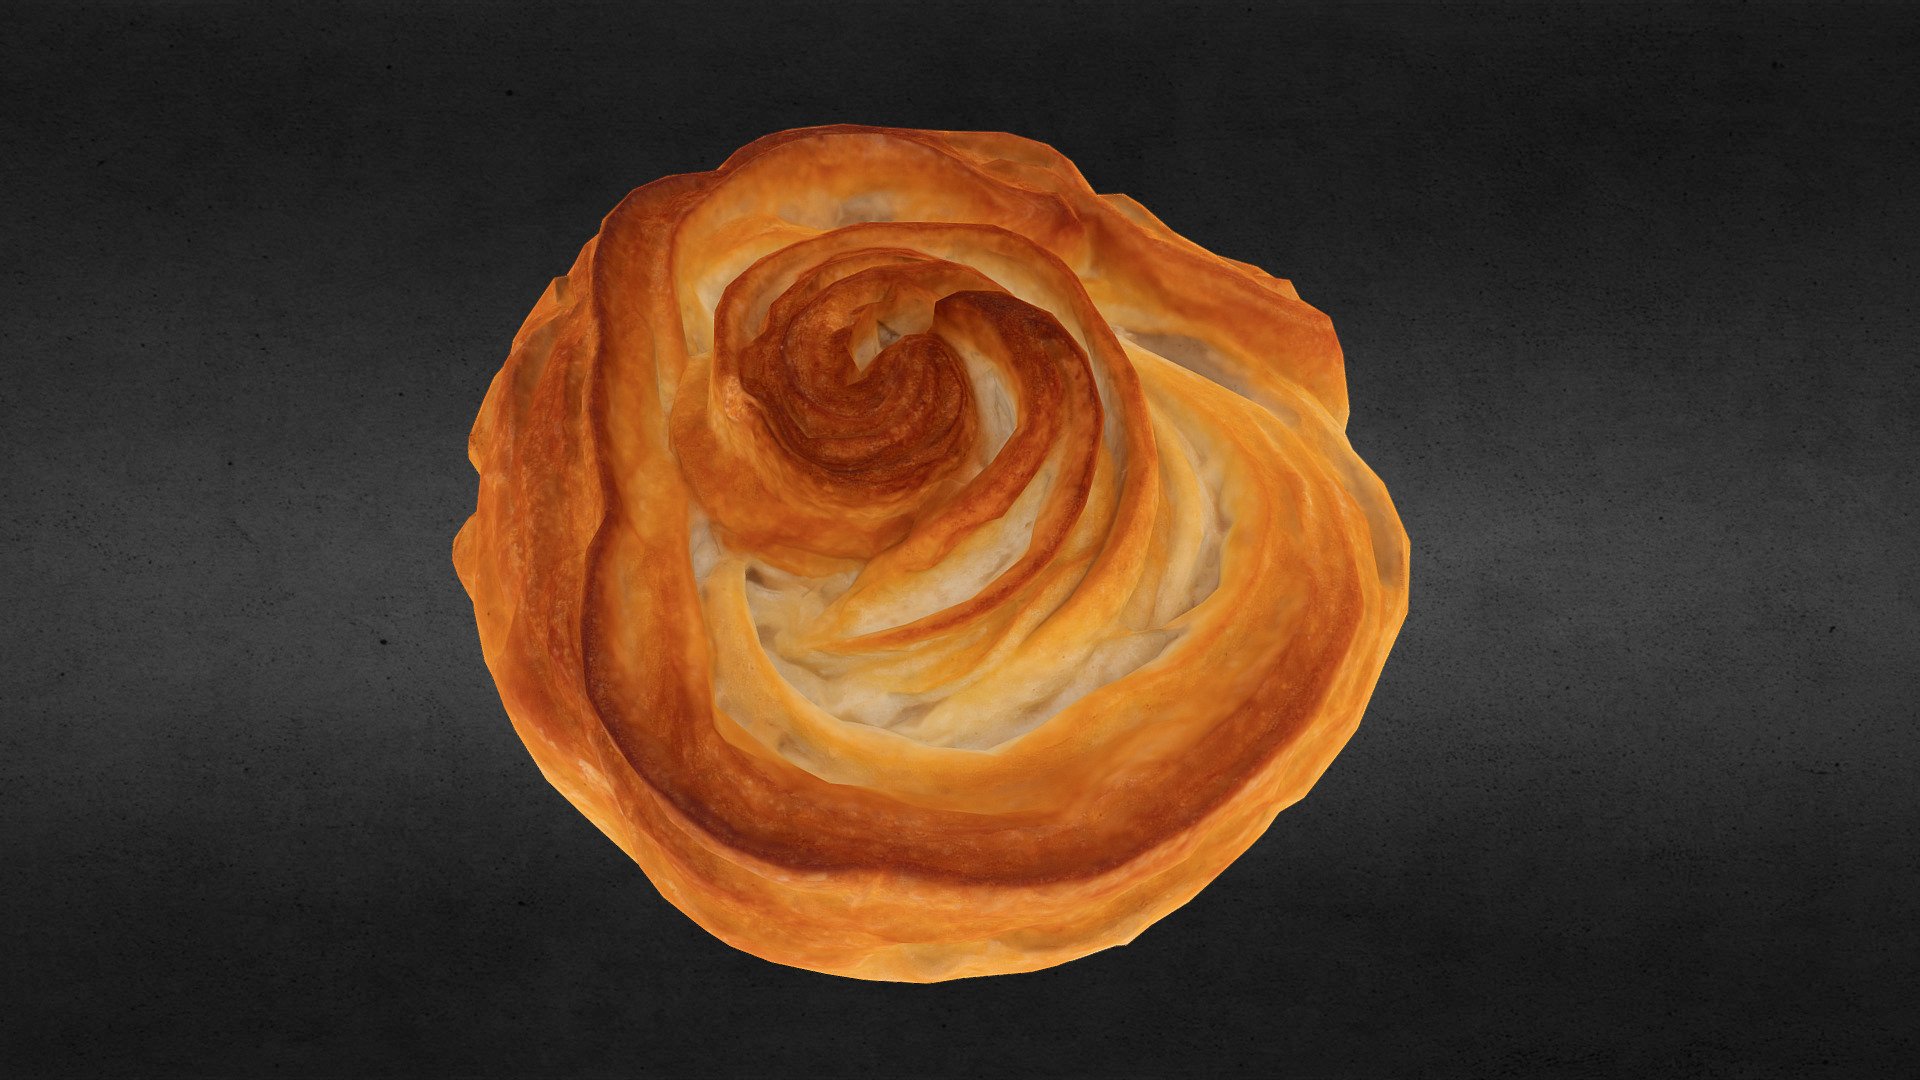 &ldquo;Kouign-amann is a specialty of the town of Douarnenez in Finistère, Brittany, where it originated around 1860